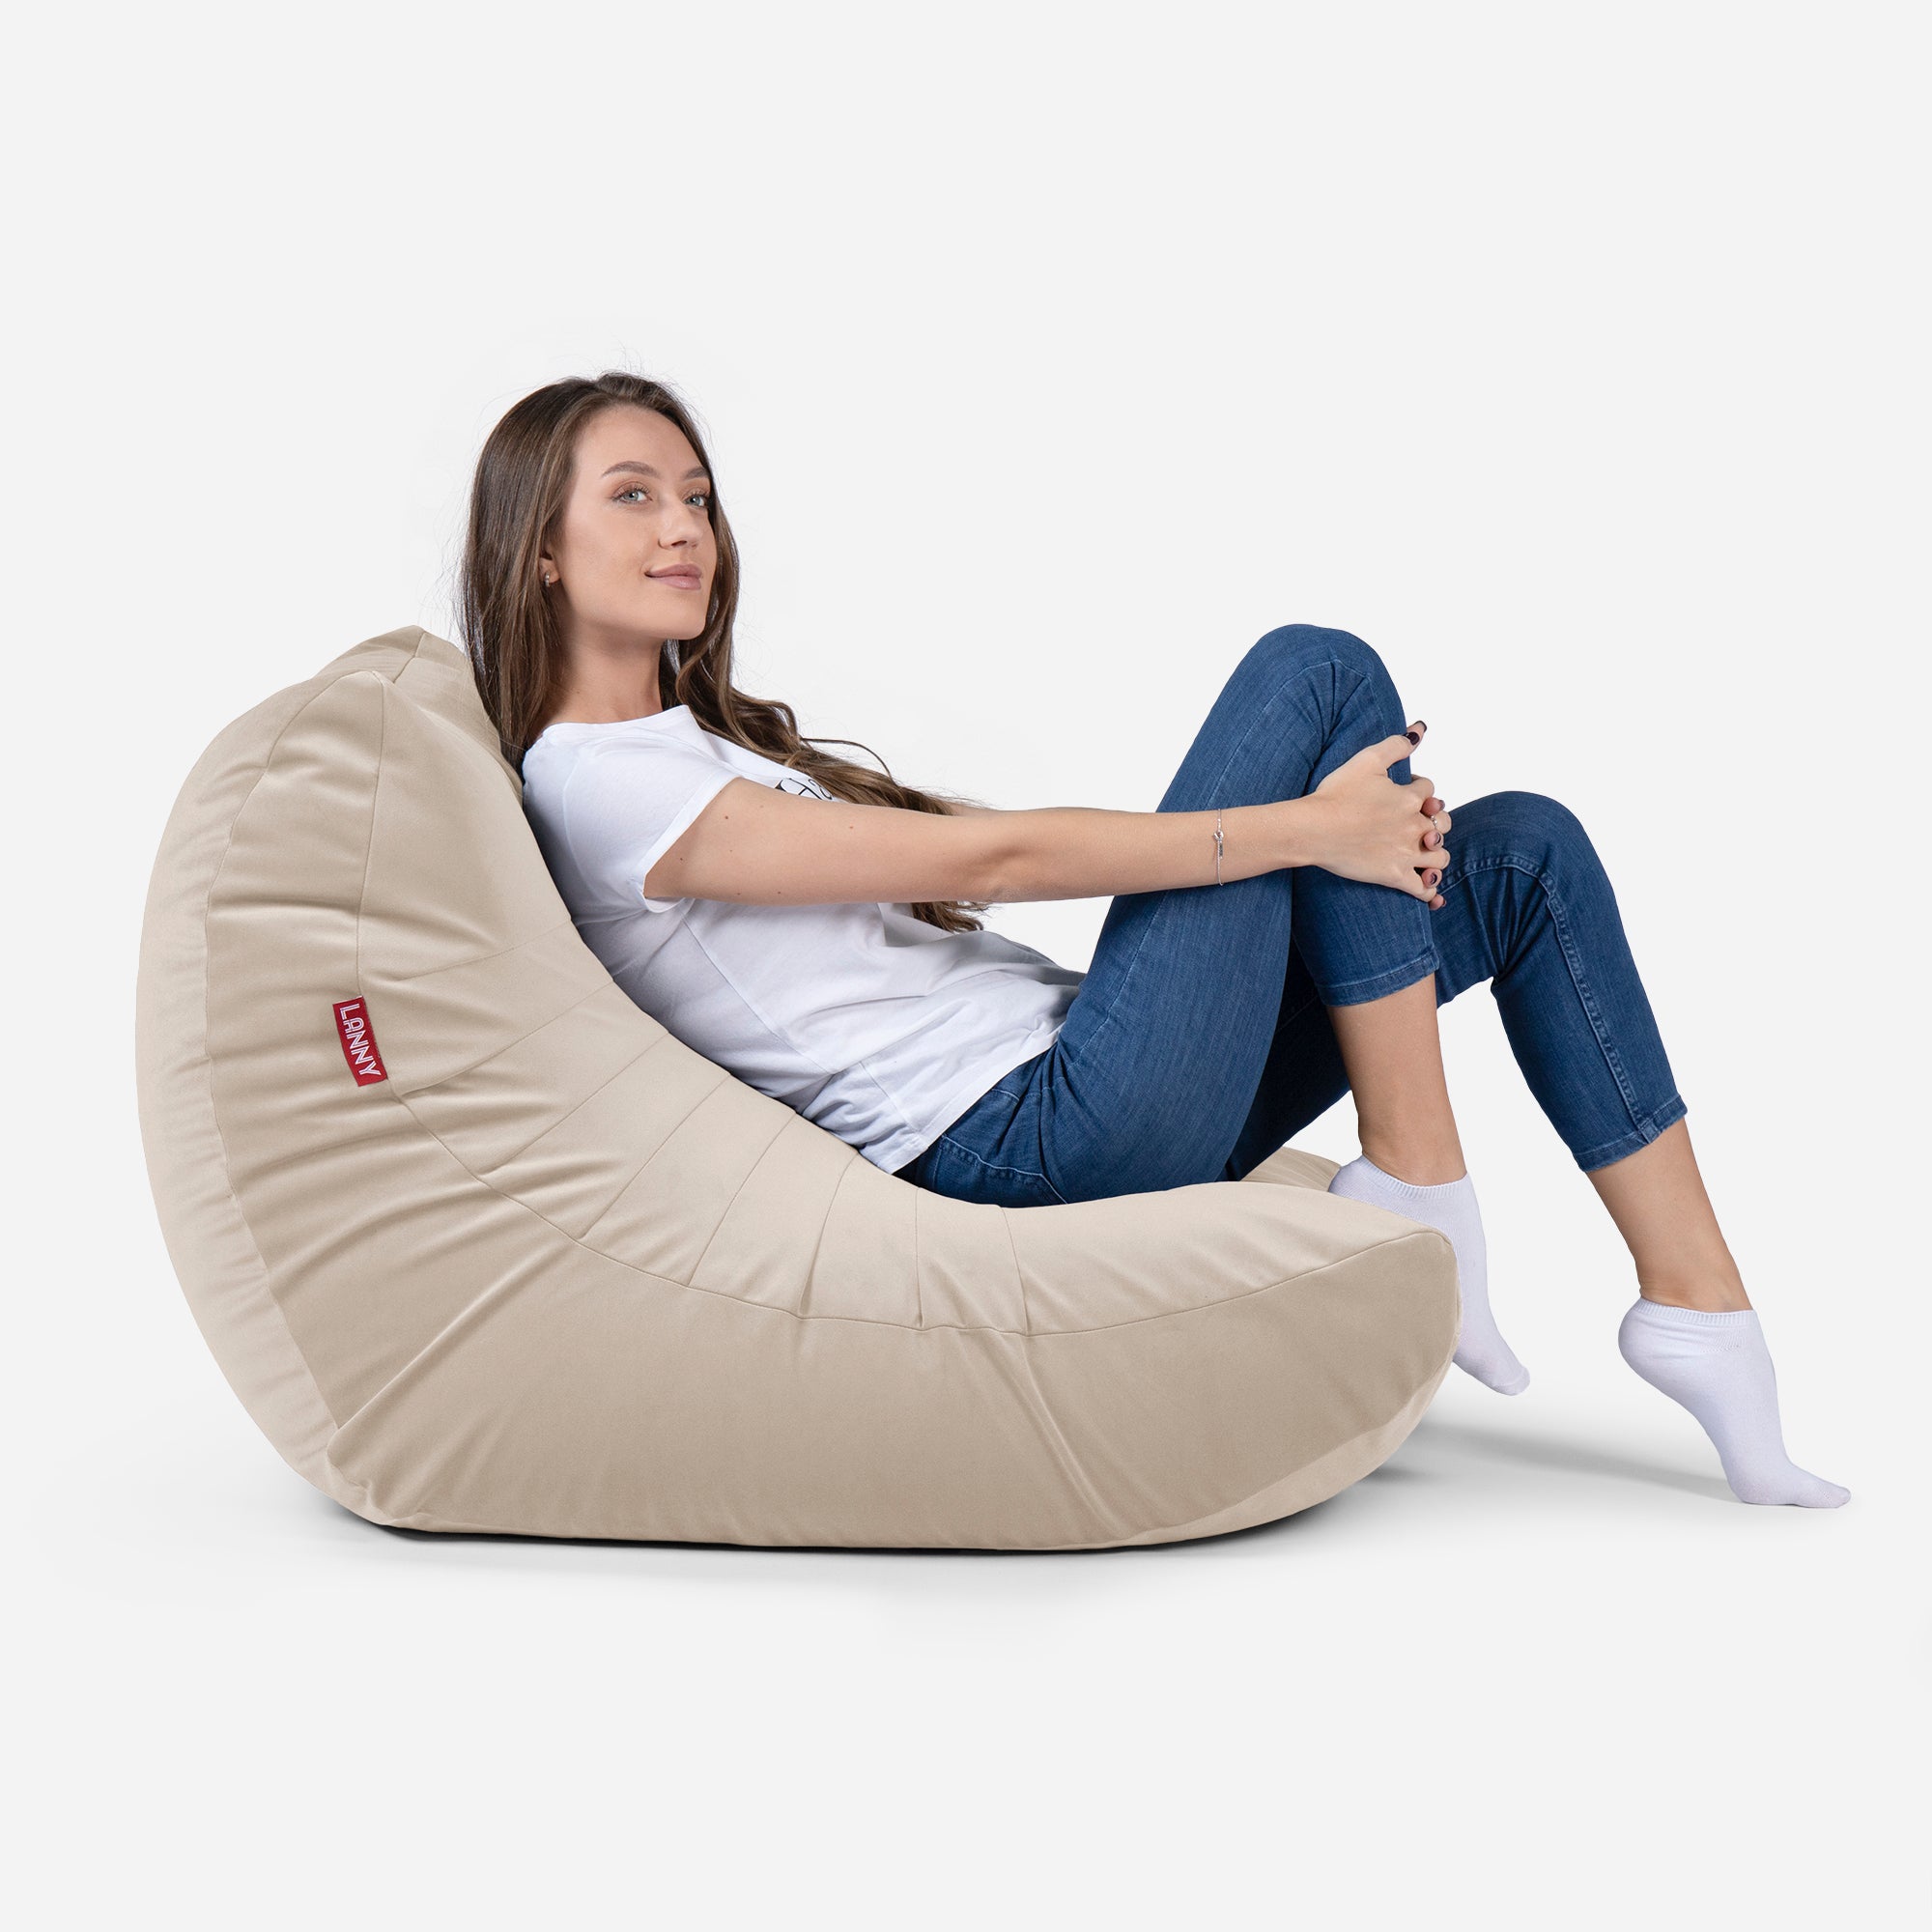 Beanbag Curvy Design Beige color with girl seating on it 